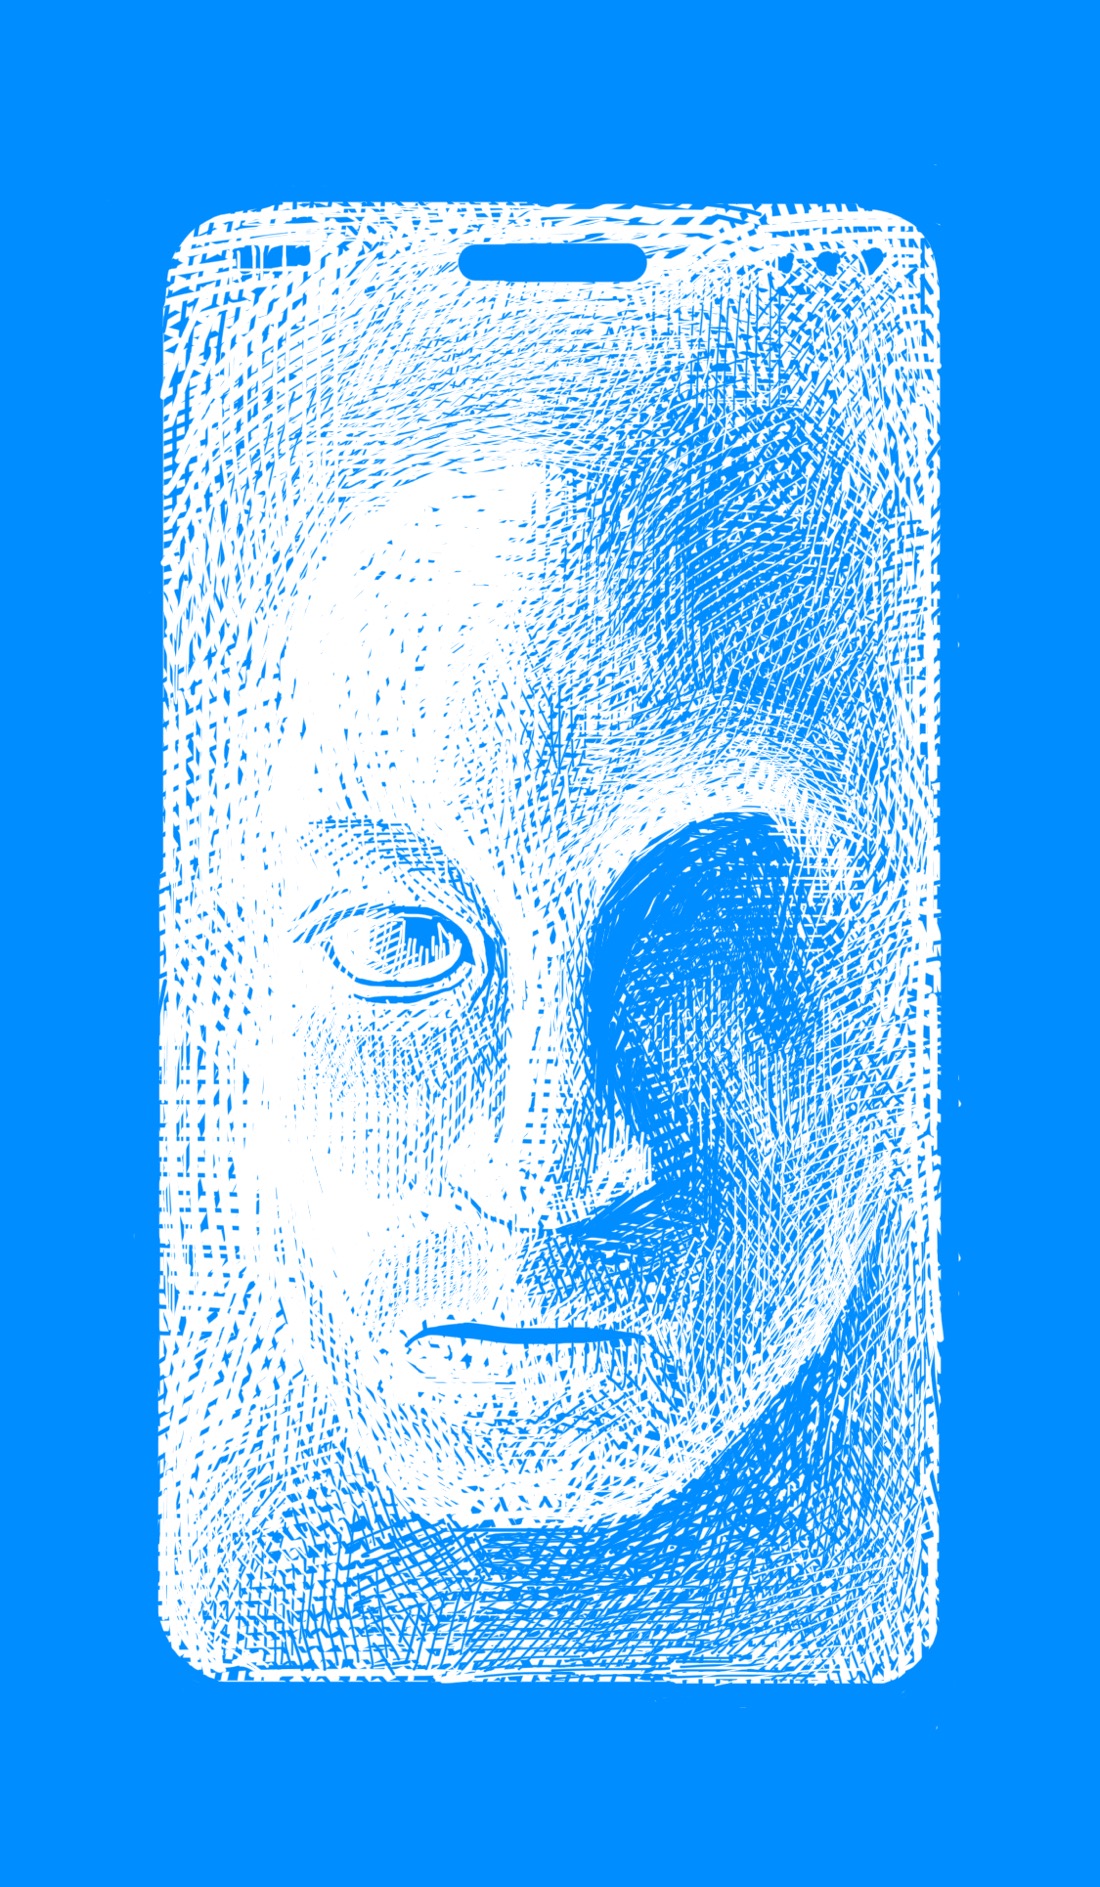 An eerie face peers from the blue display of a smartphone. Be careful who you click on.